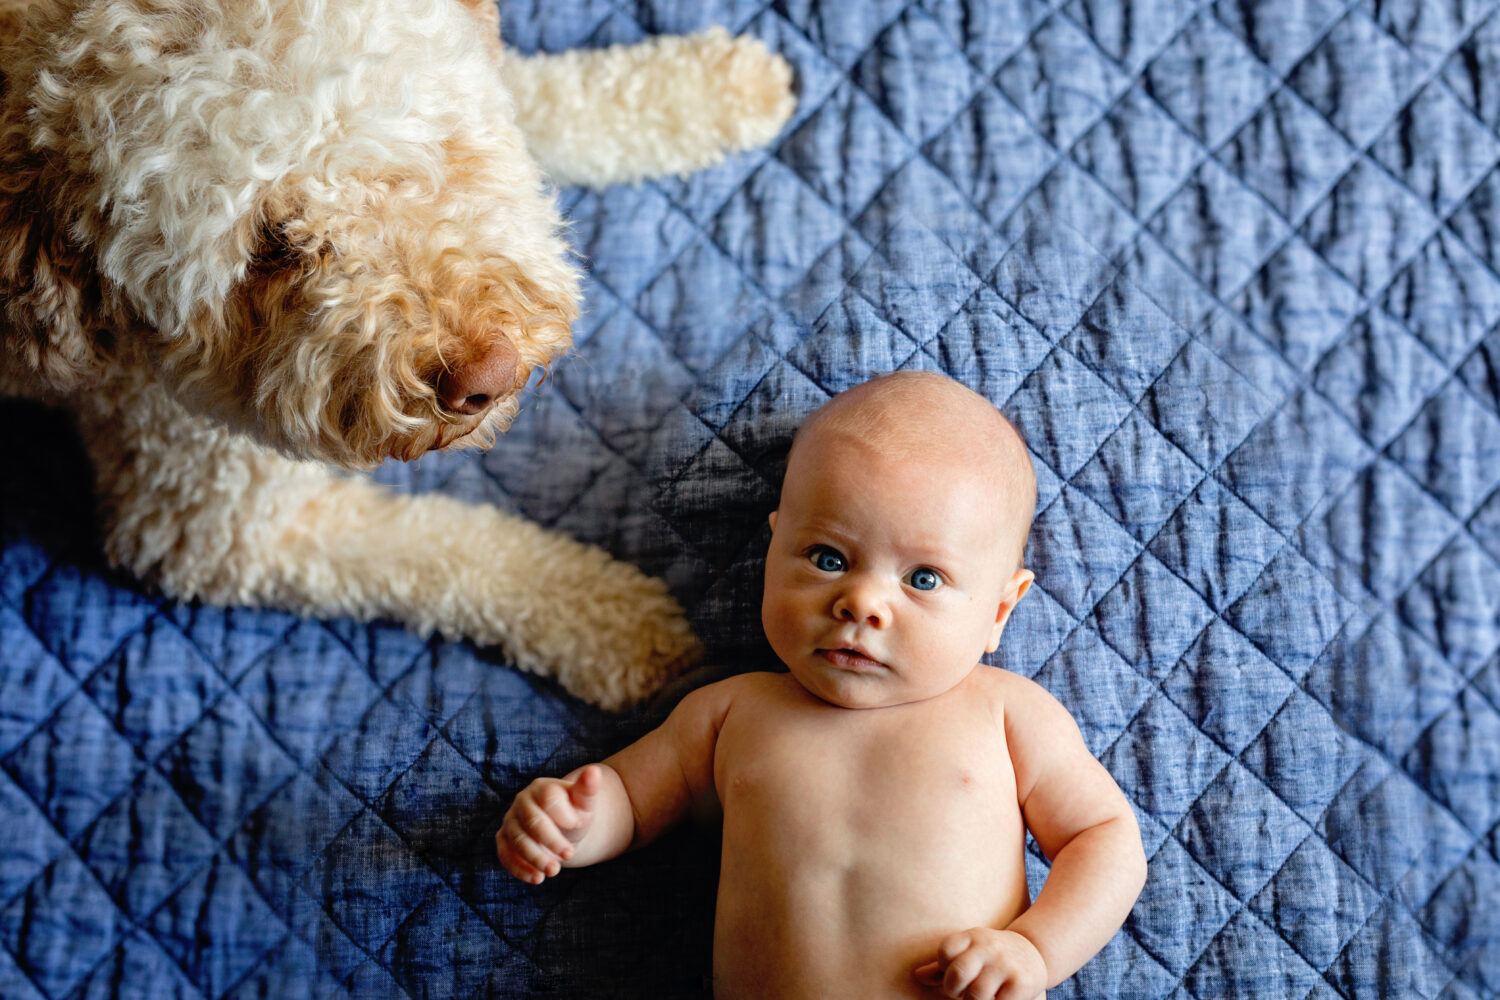 Adorable baby and his dog lying on a blanket